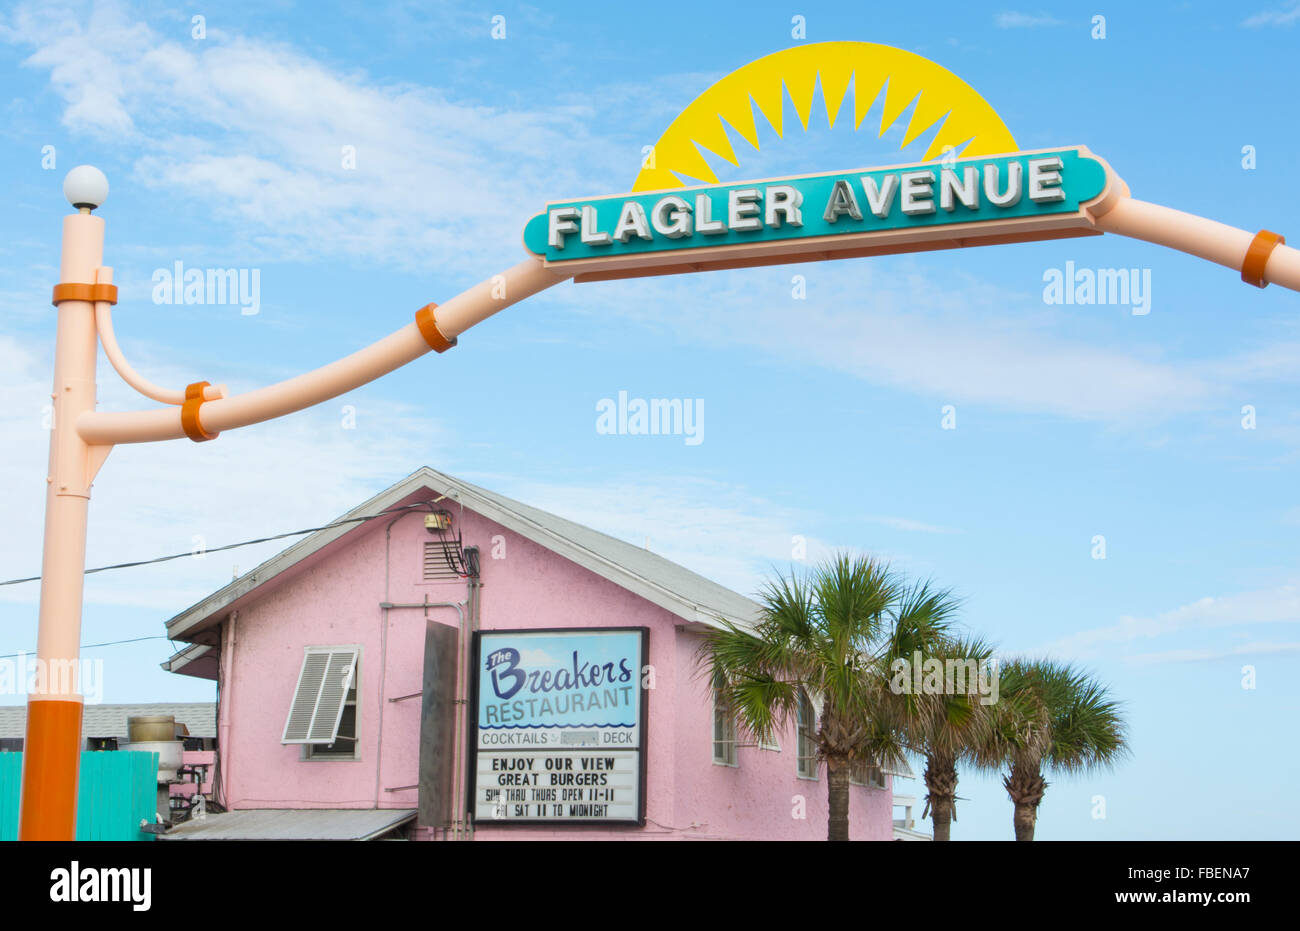 Flagler Avenue Florida High Resolution Stock Photography And Images Alamy